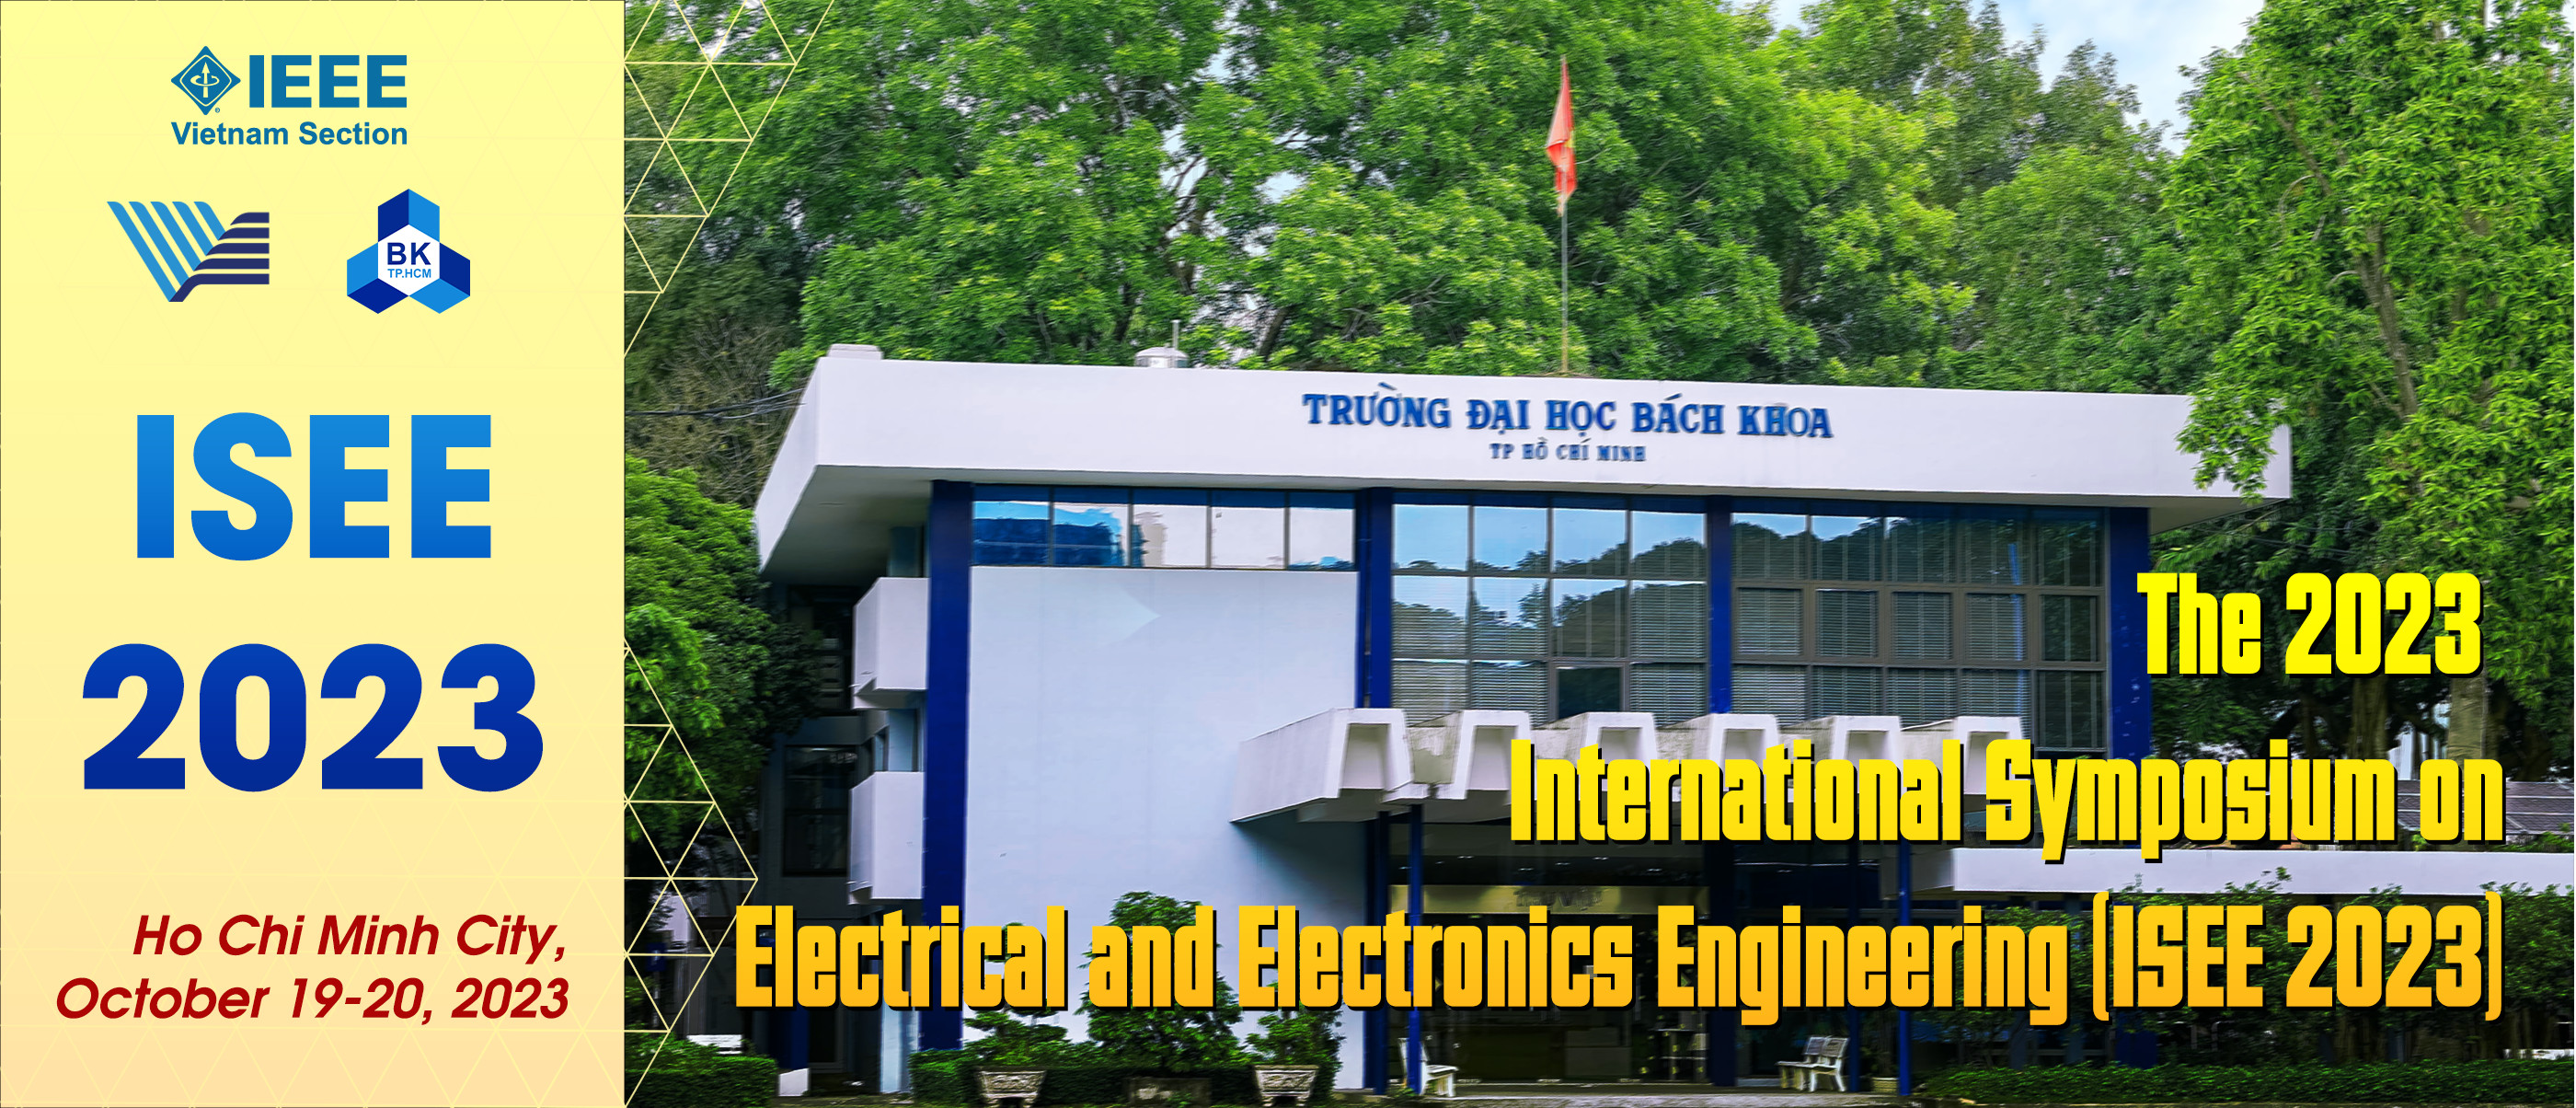 The 2023 International Symposium on Electrical and Electronics Engineering (ISEE 2023)  Ho Chi Minh City, October 19-20, 2023